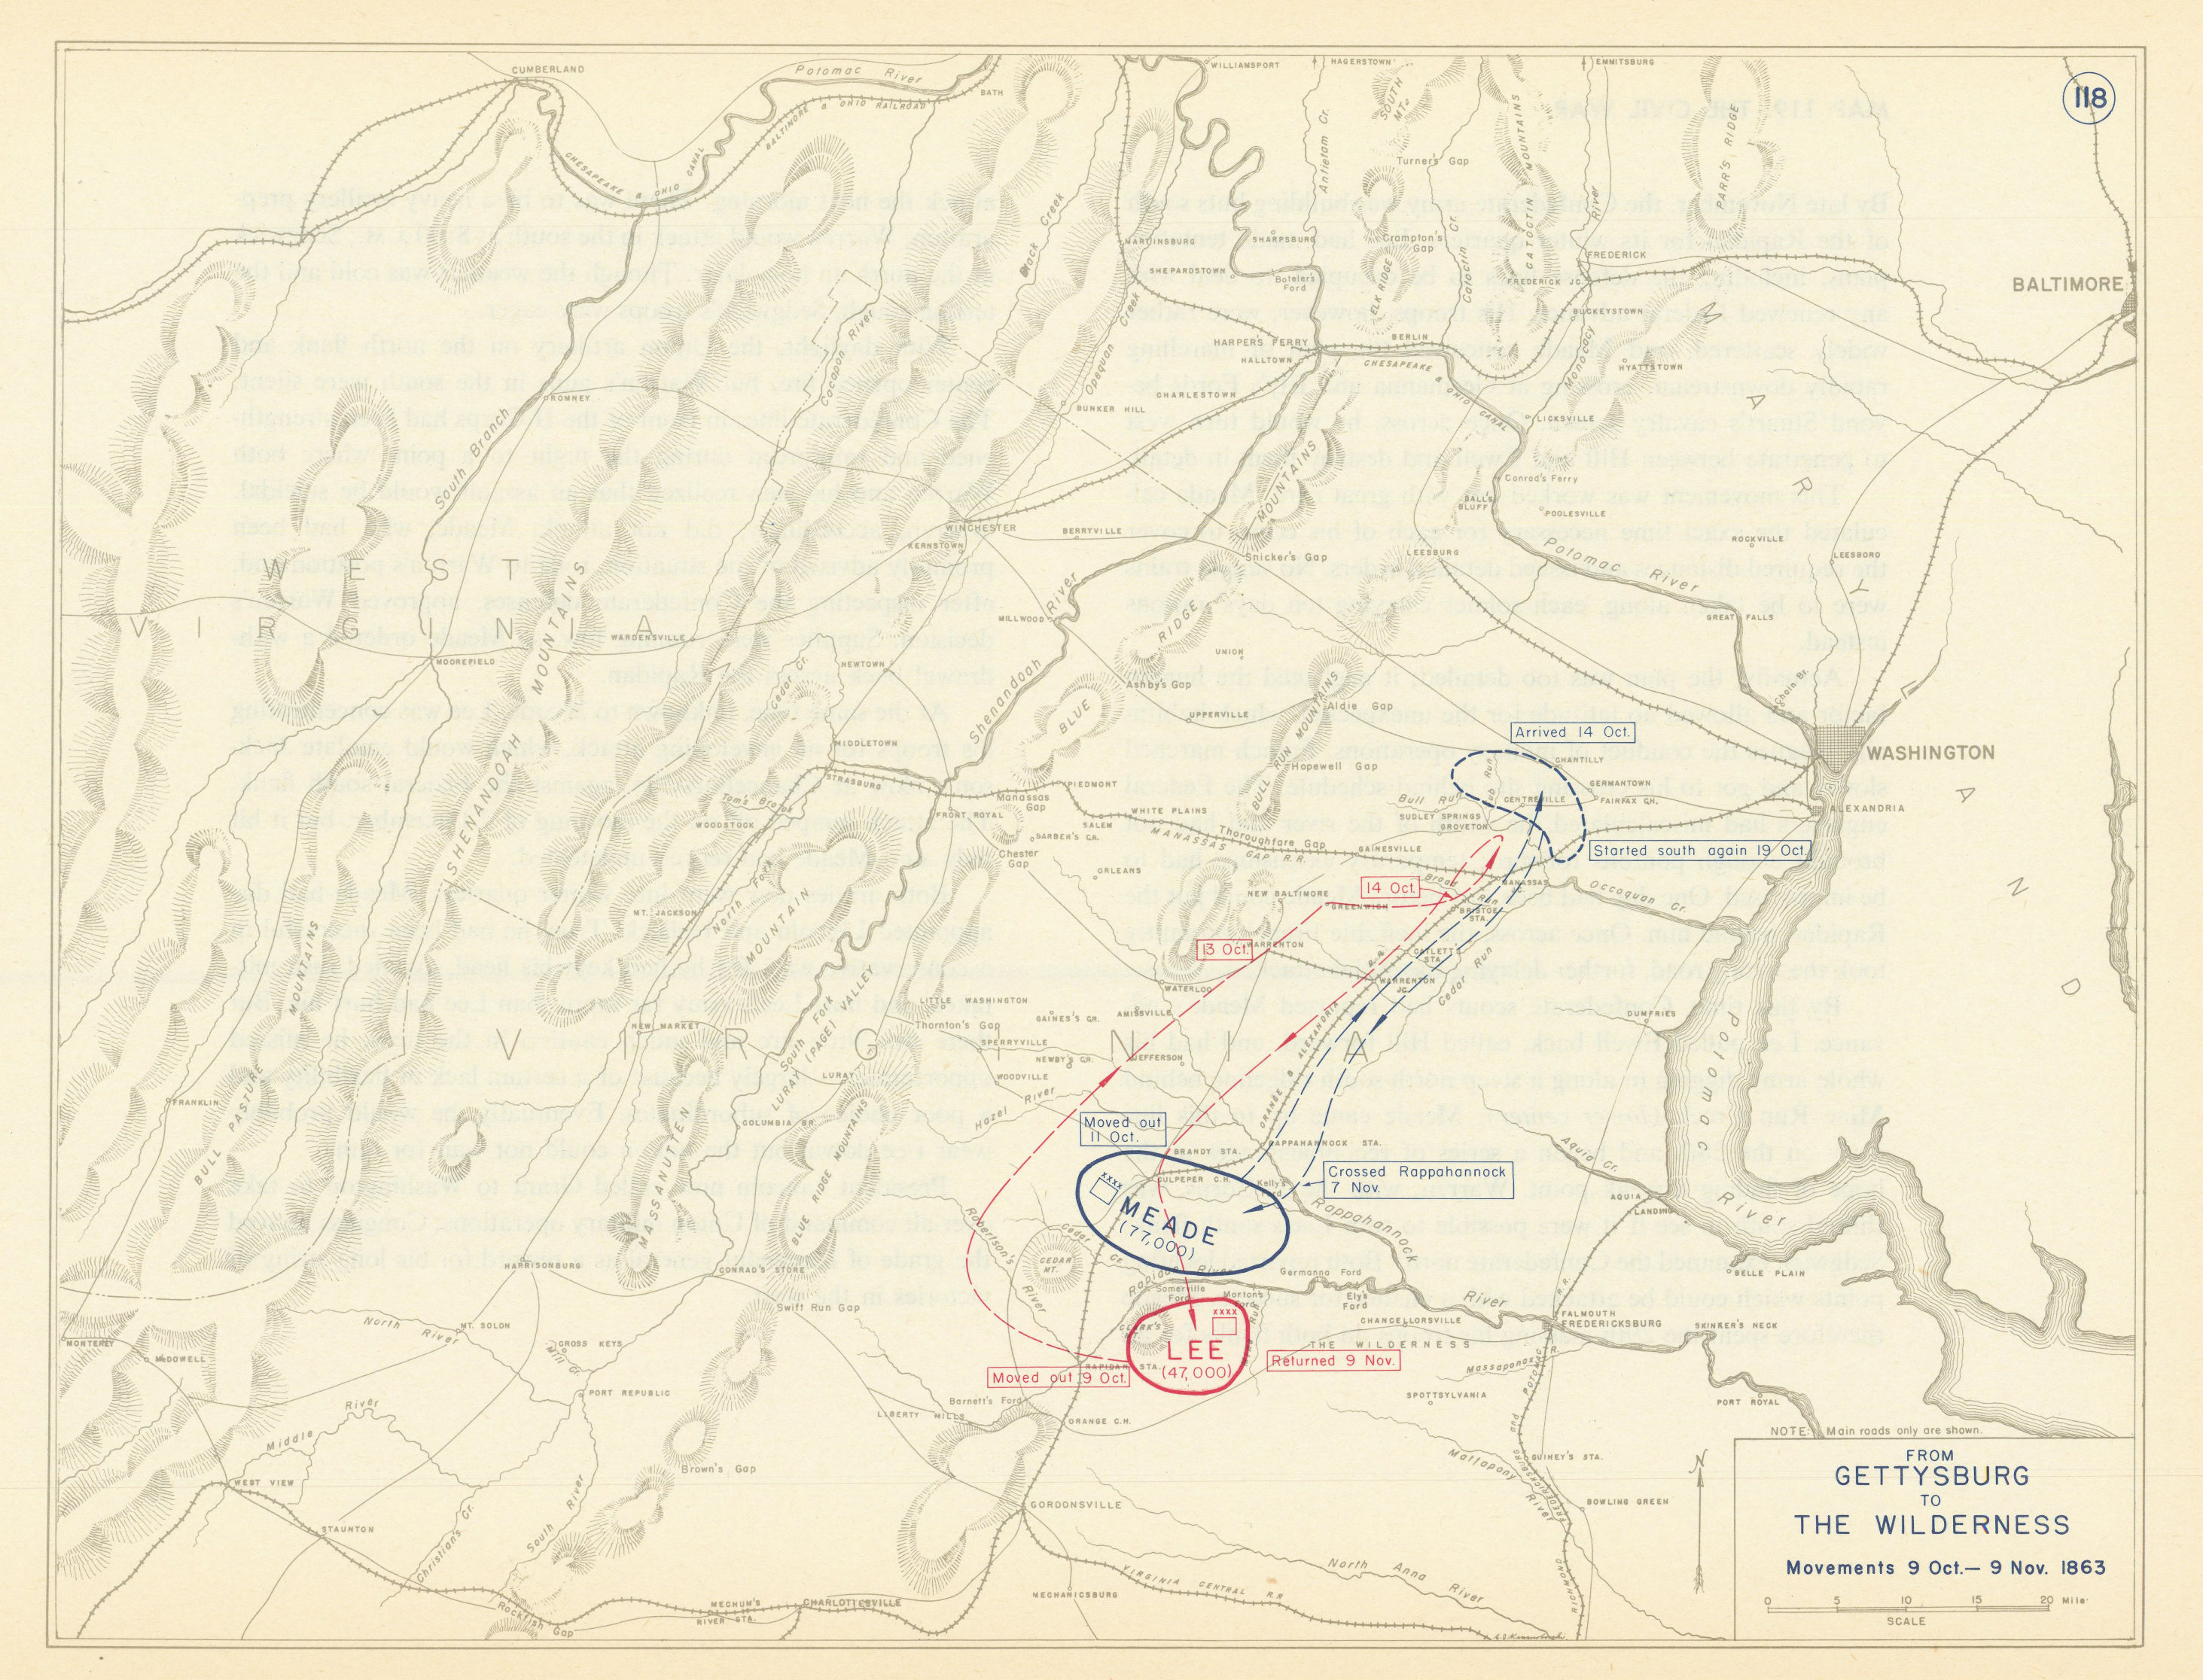 American Civil War. 9 Oct-9 Nov 1863. From Gettysburg to The Wilderness 1959 map